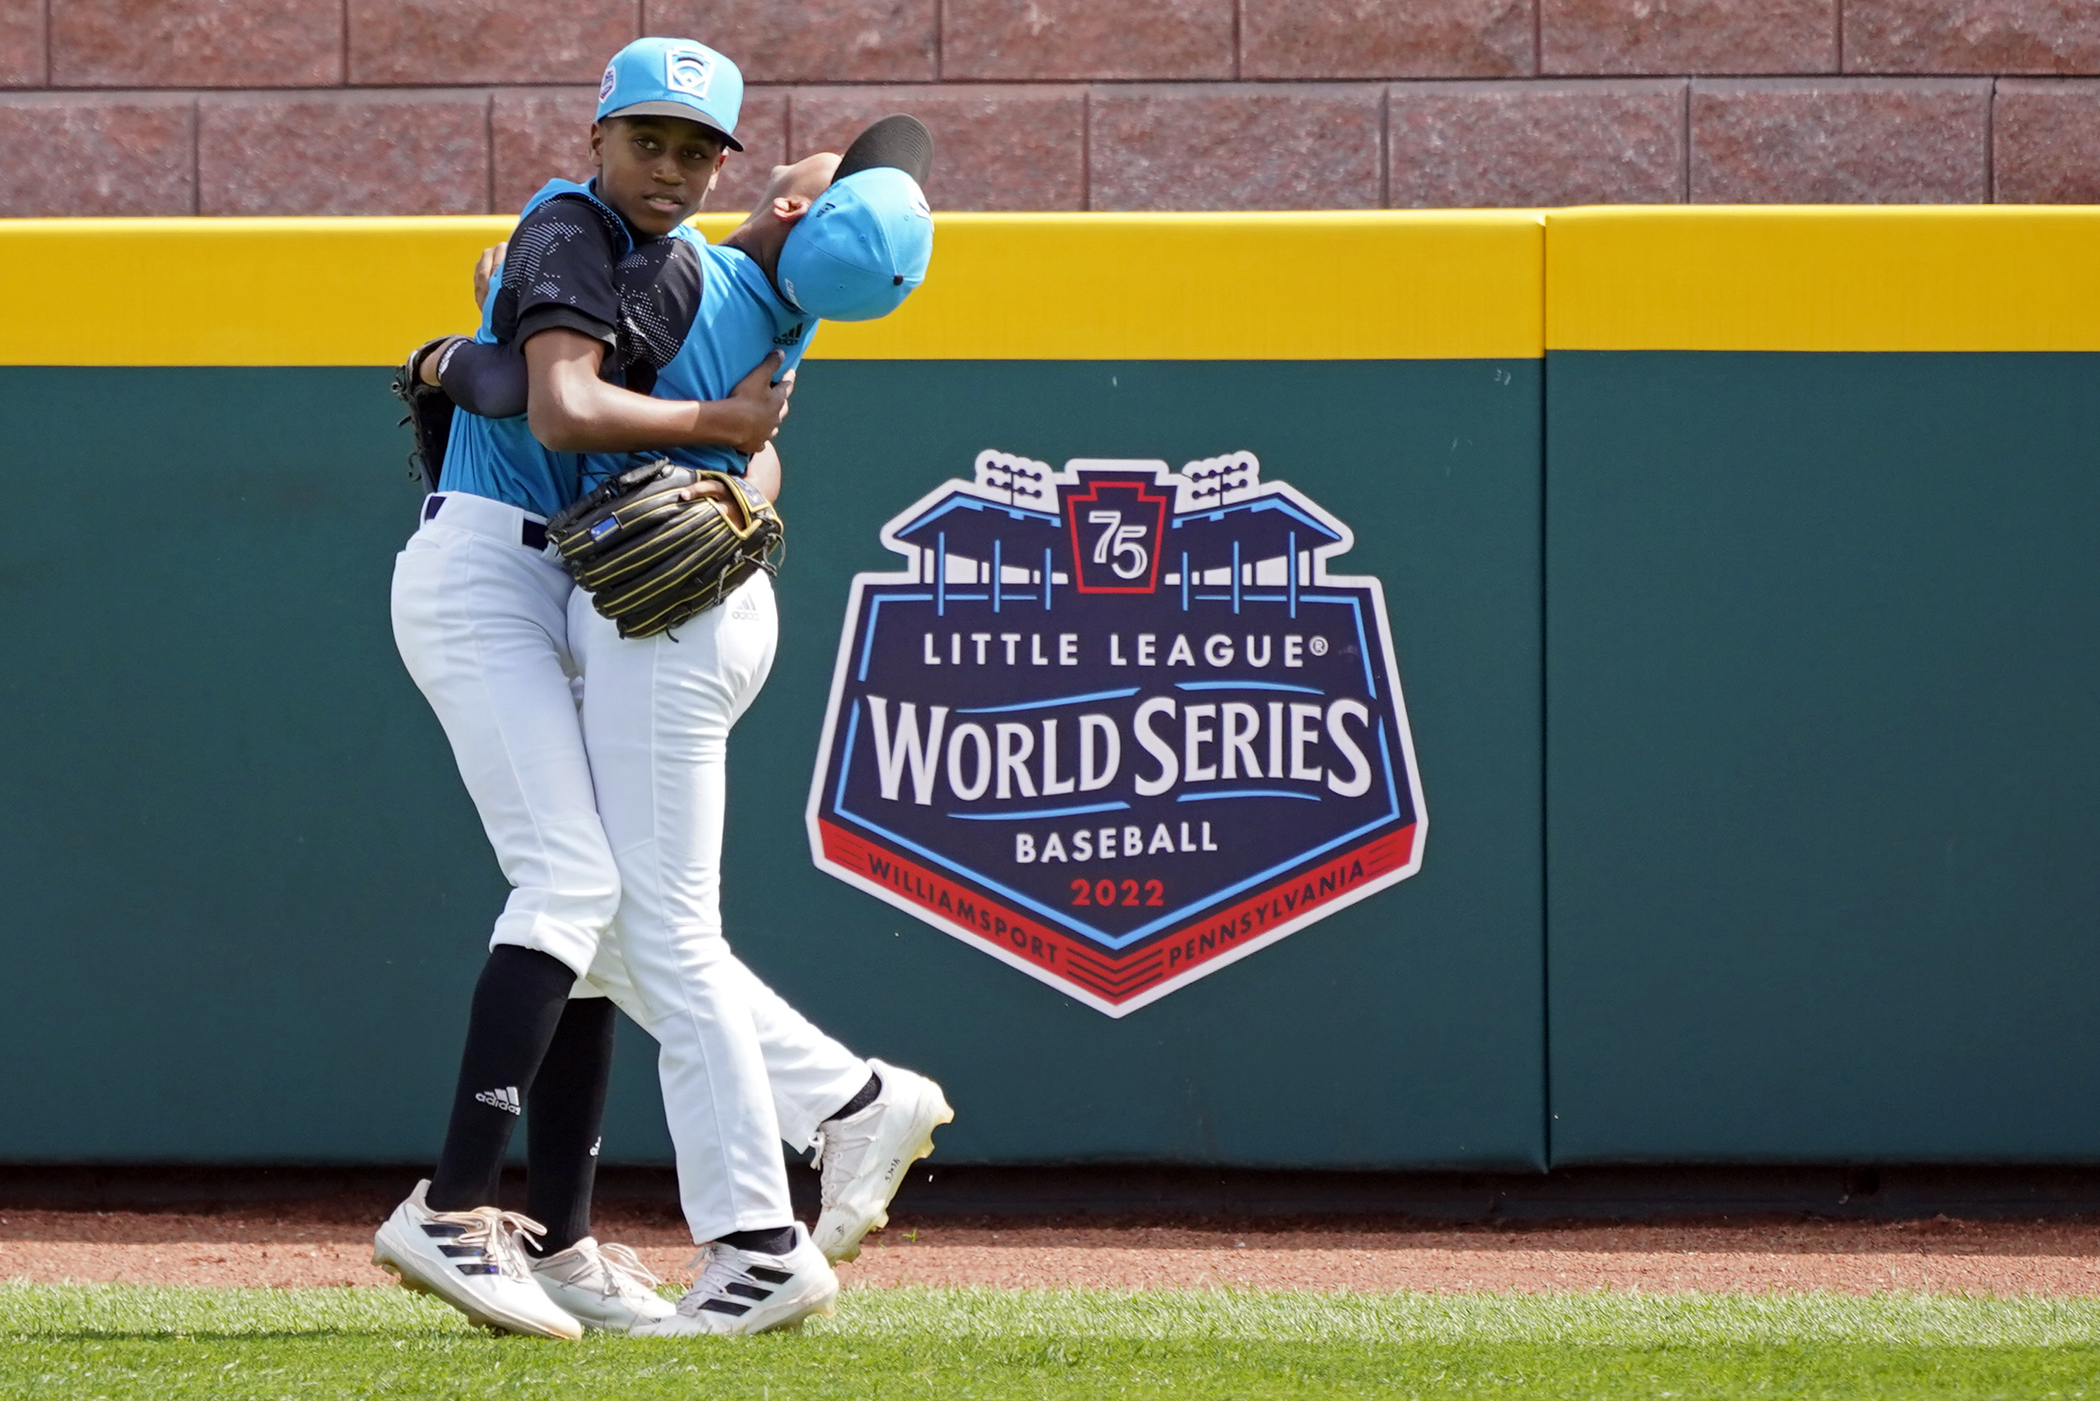 Little League World Series Championship How to watch Hawaii vs